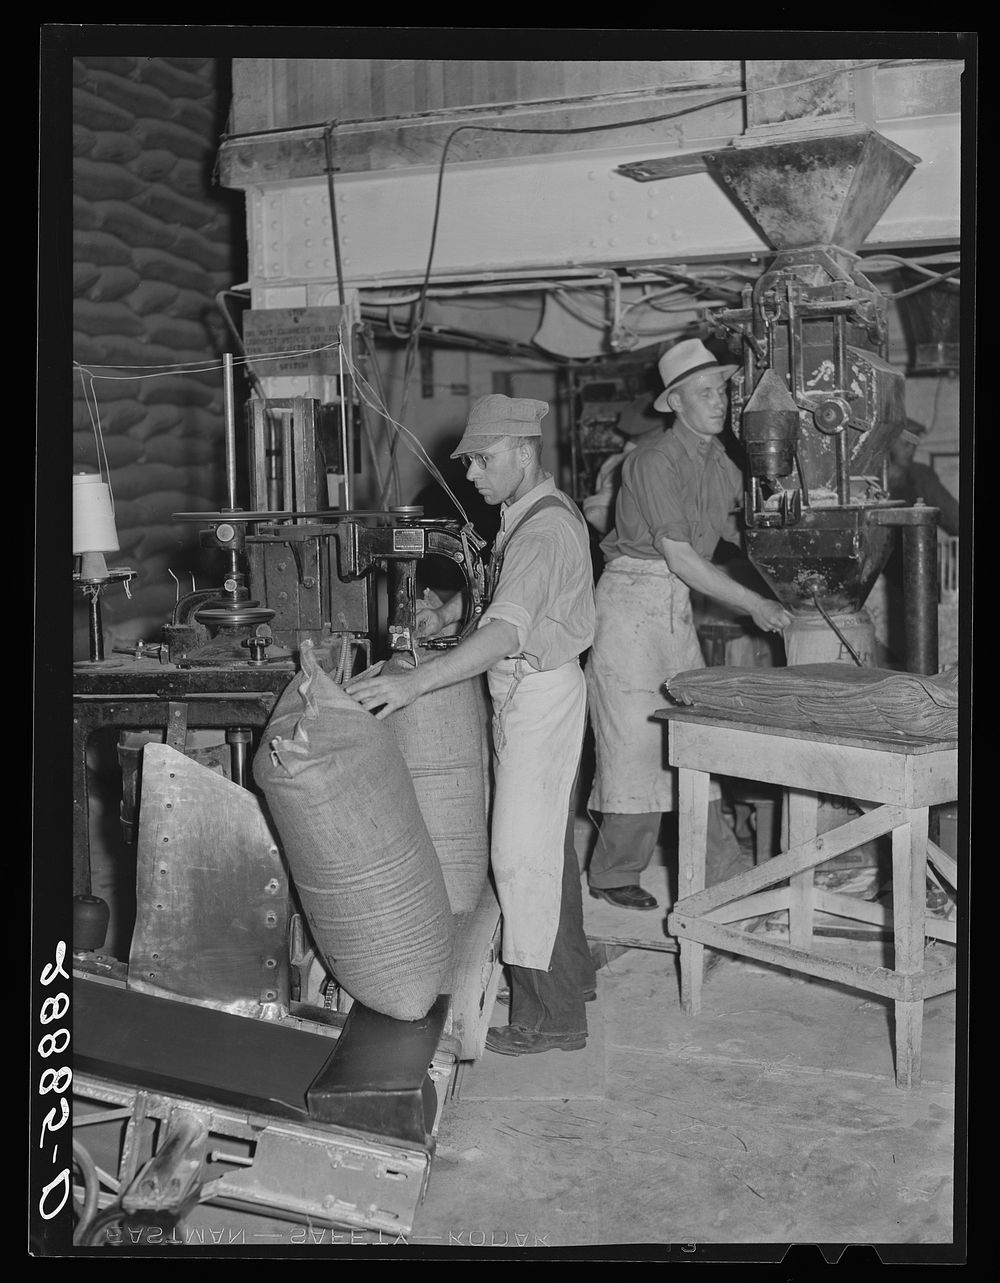 Filling bags with sugar. Brighton, Colorado. Sourced from the Library of Congress.